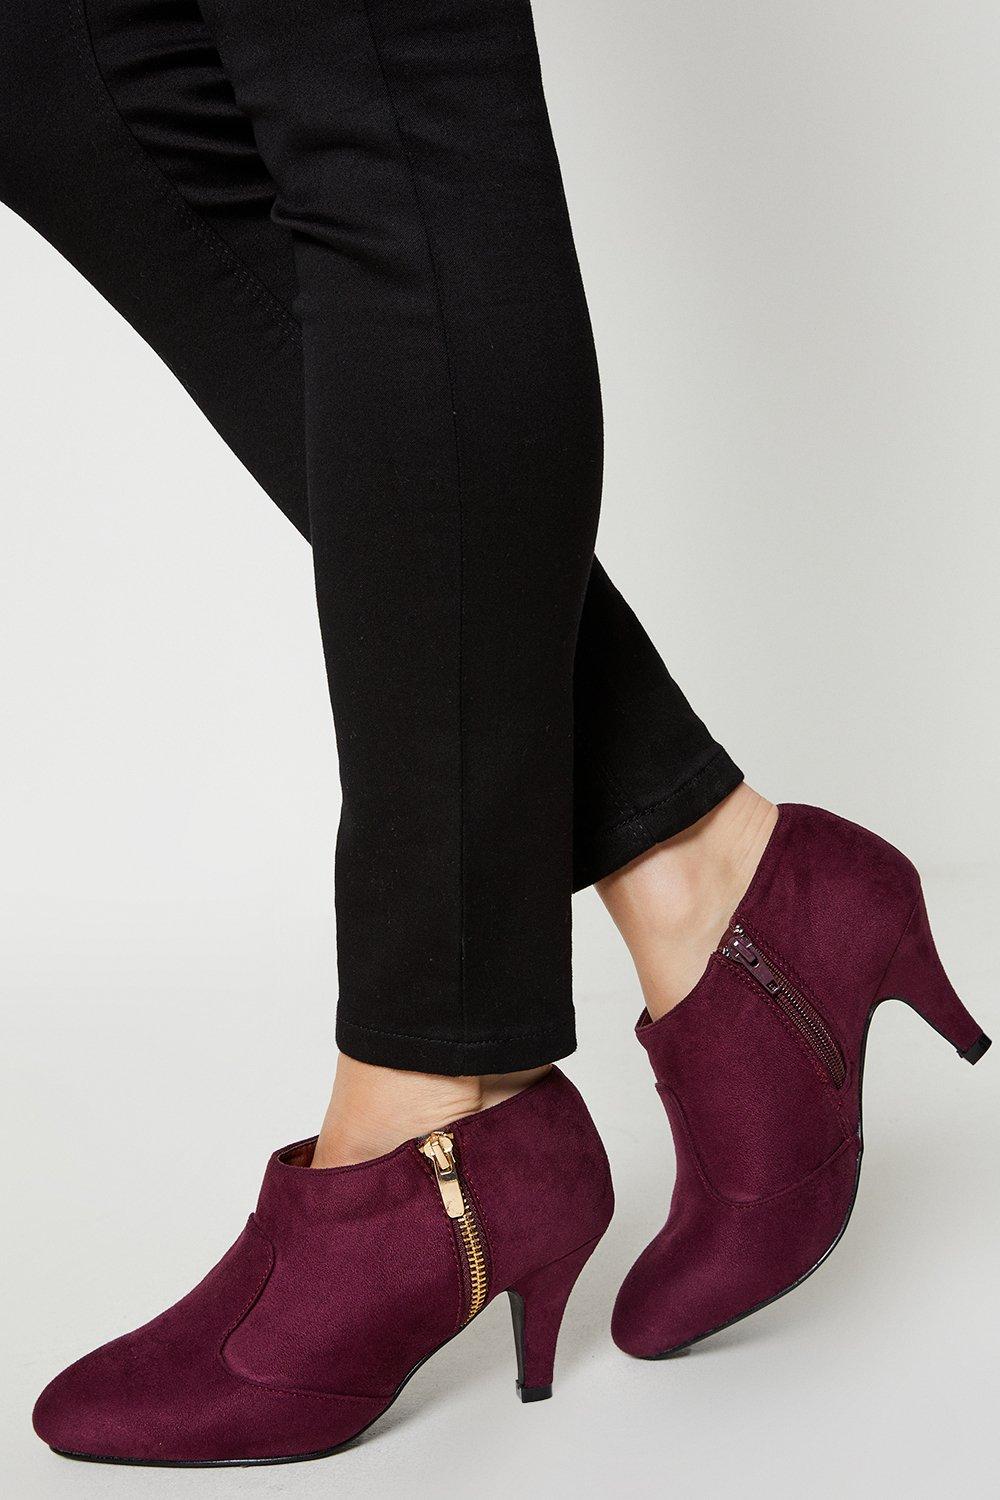 Women’s Good For The Sole: Wide Fit Marley Comfort Zip Heeled Ankle Boots - burgundy - 8